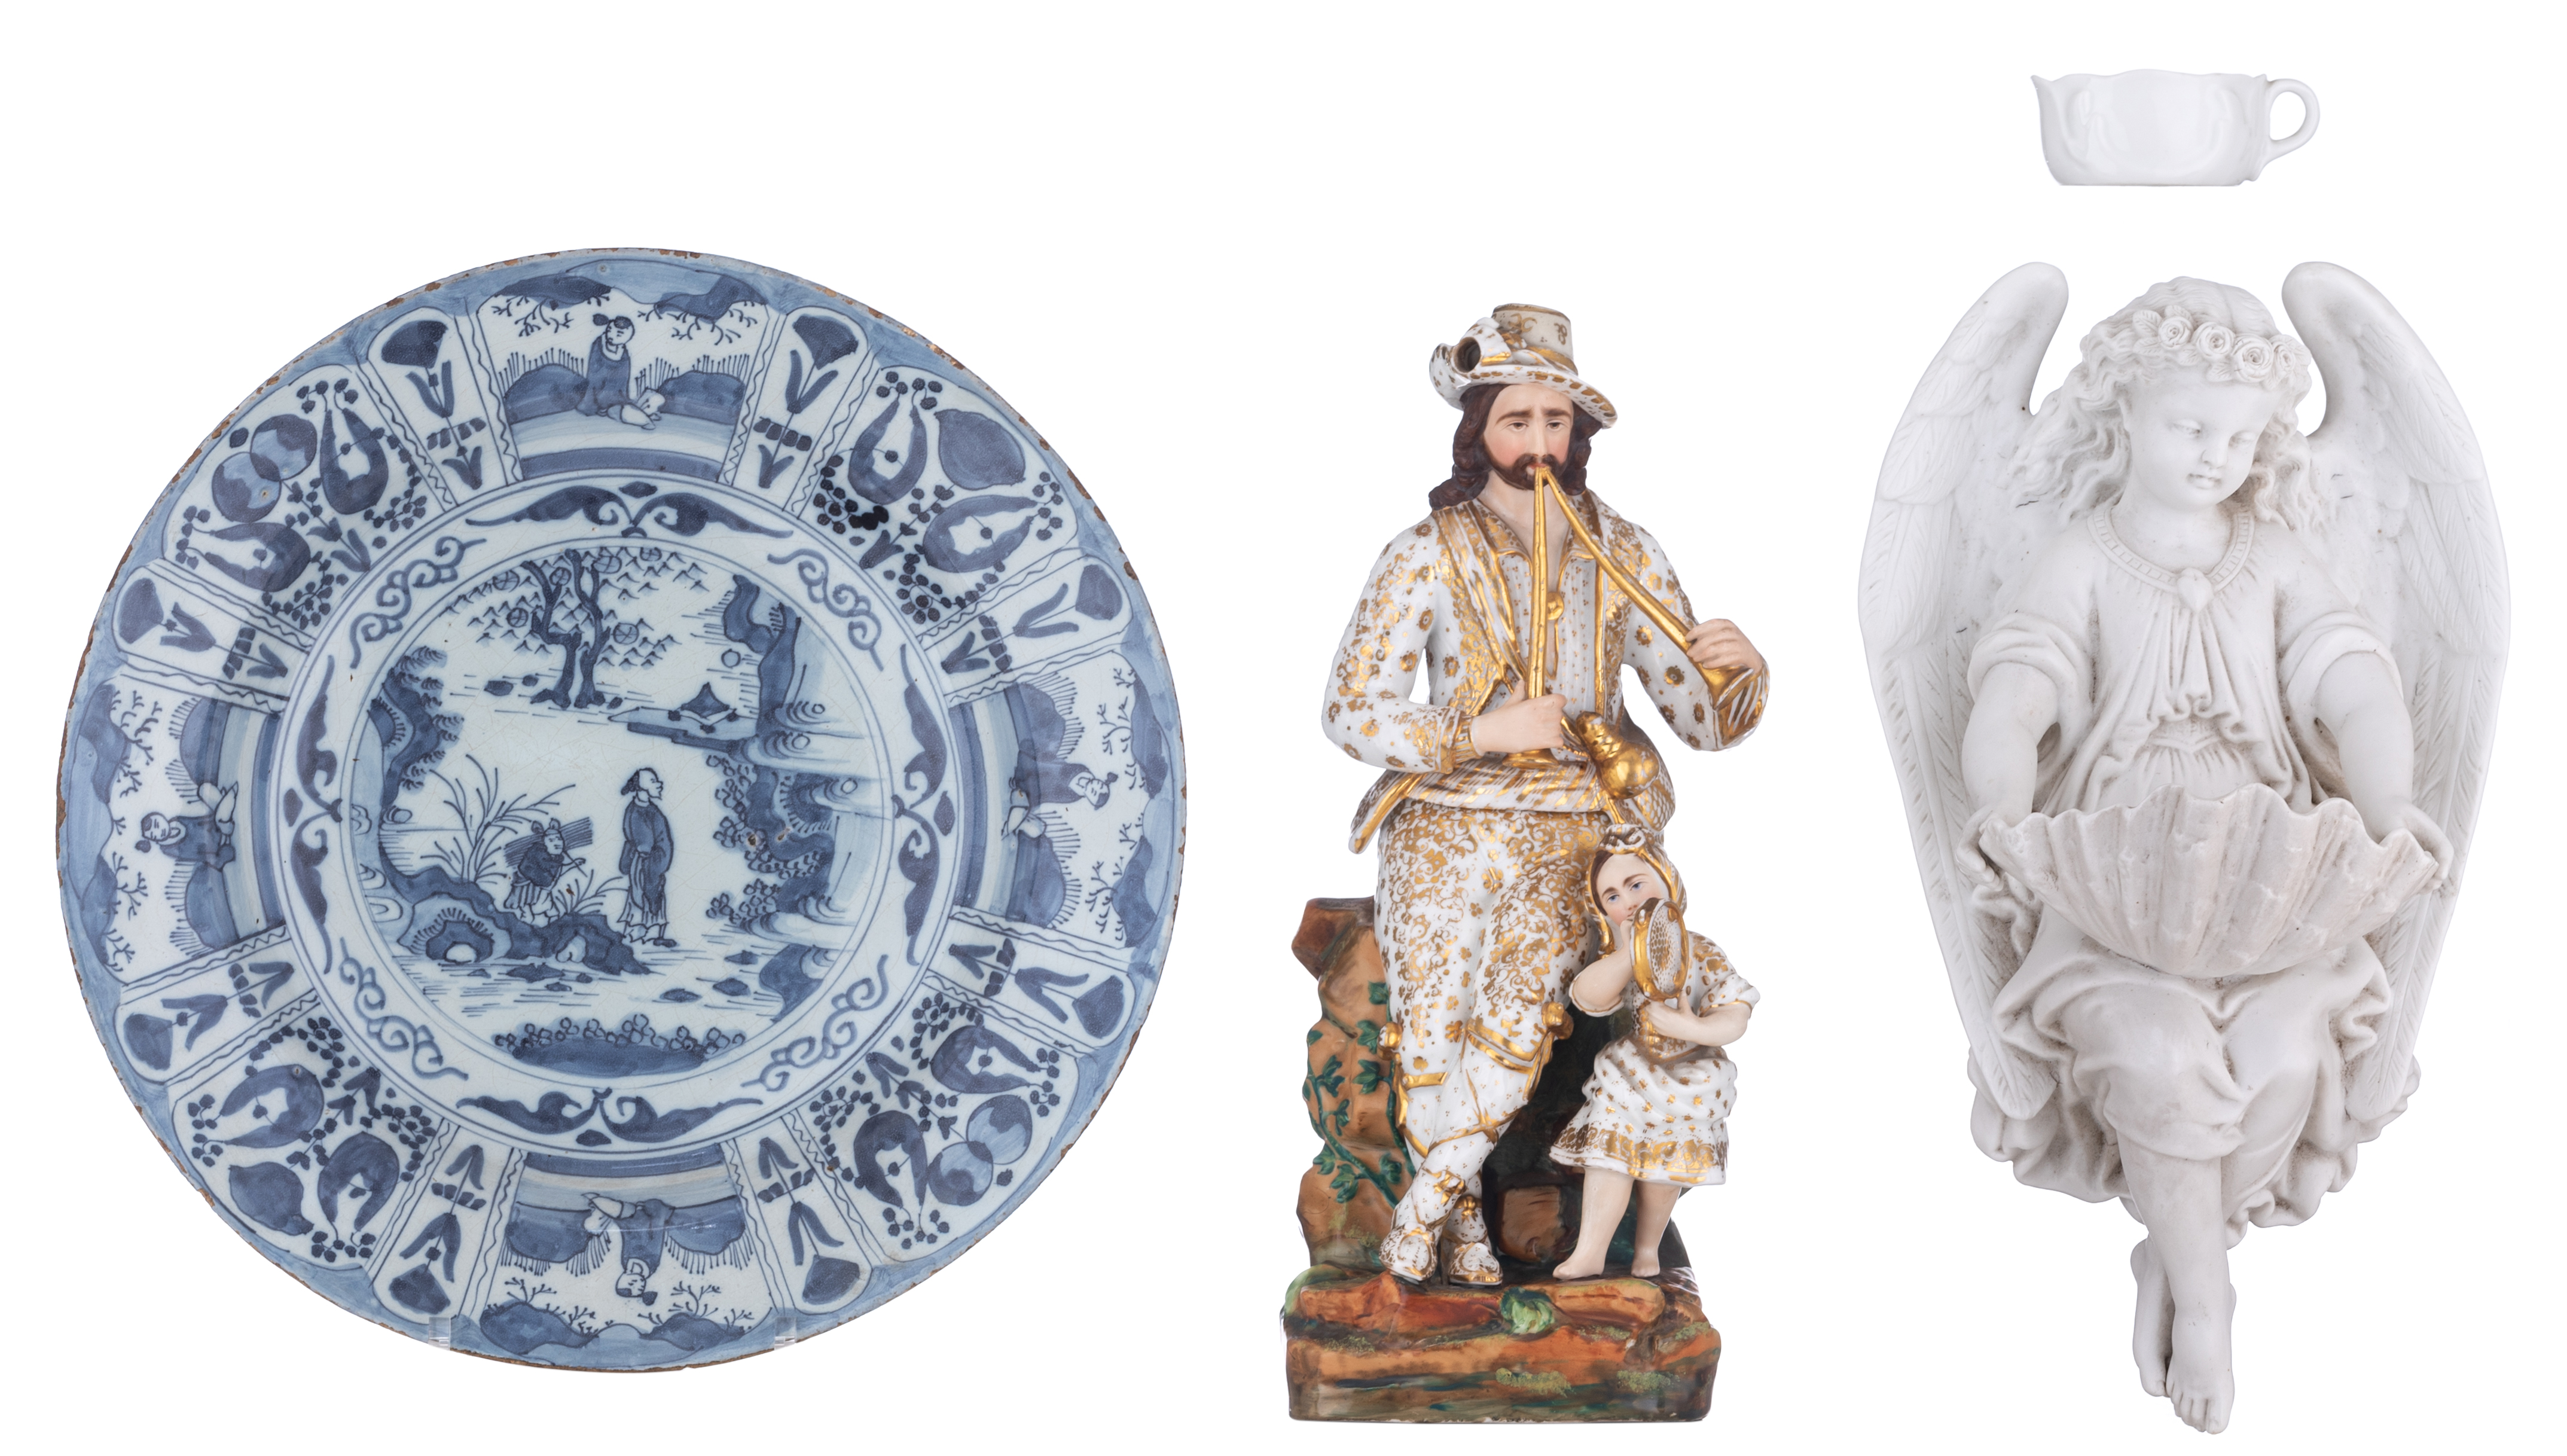 A collection of various European ceramic items, H 3,5 - 33 cm